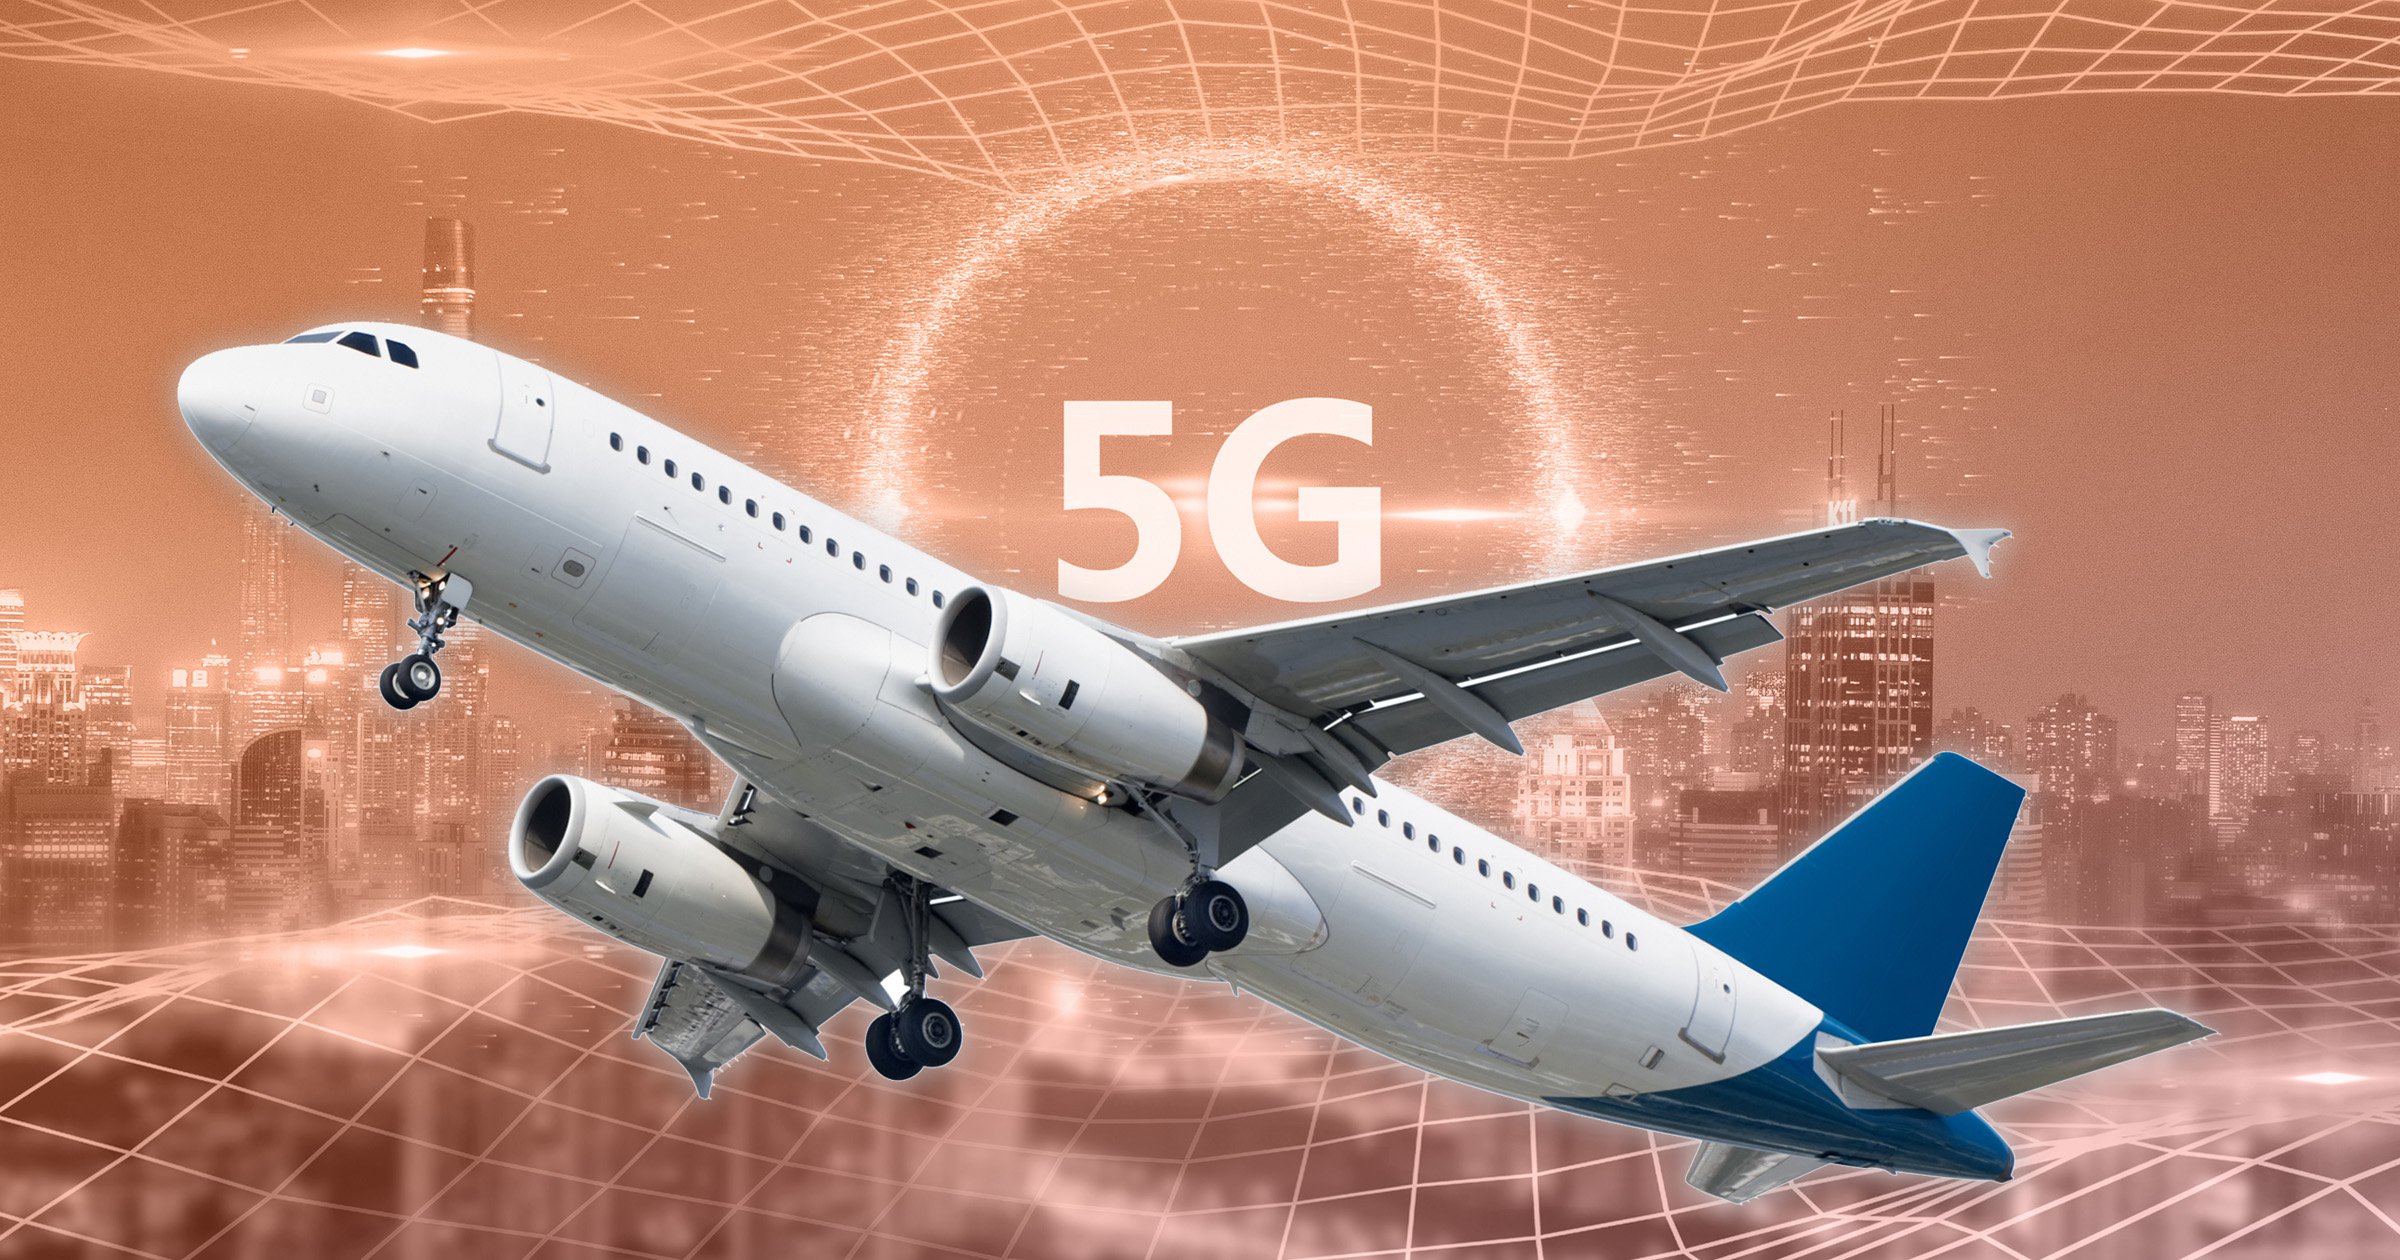 Plane in air with 5G and cityscape background